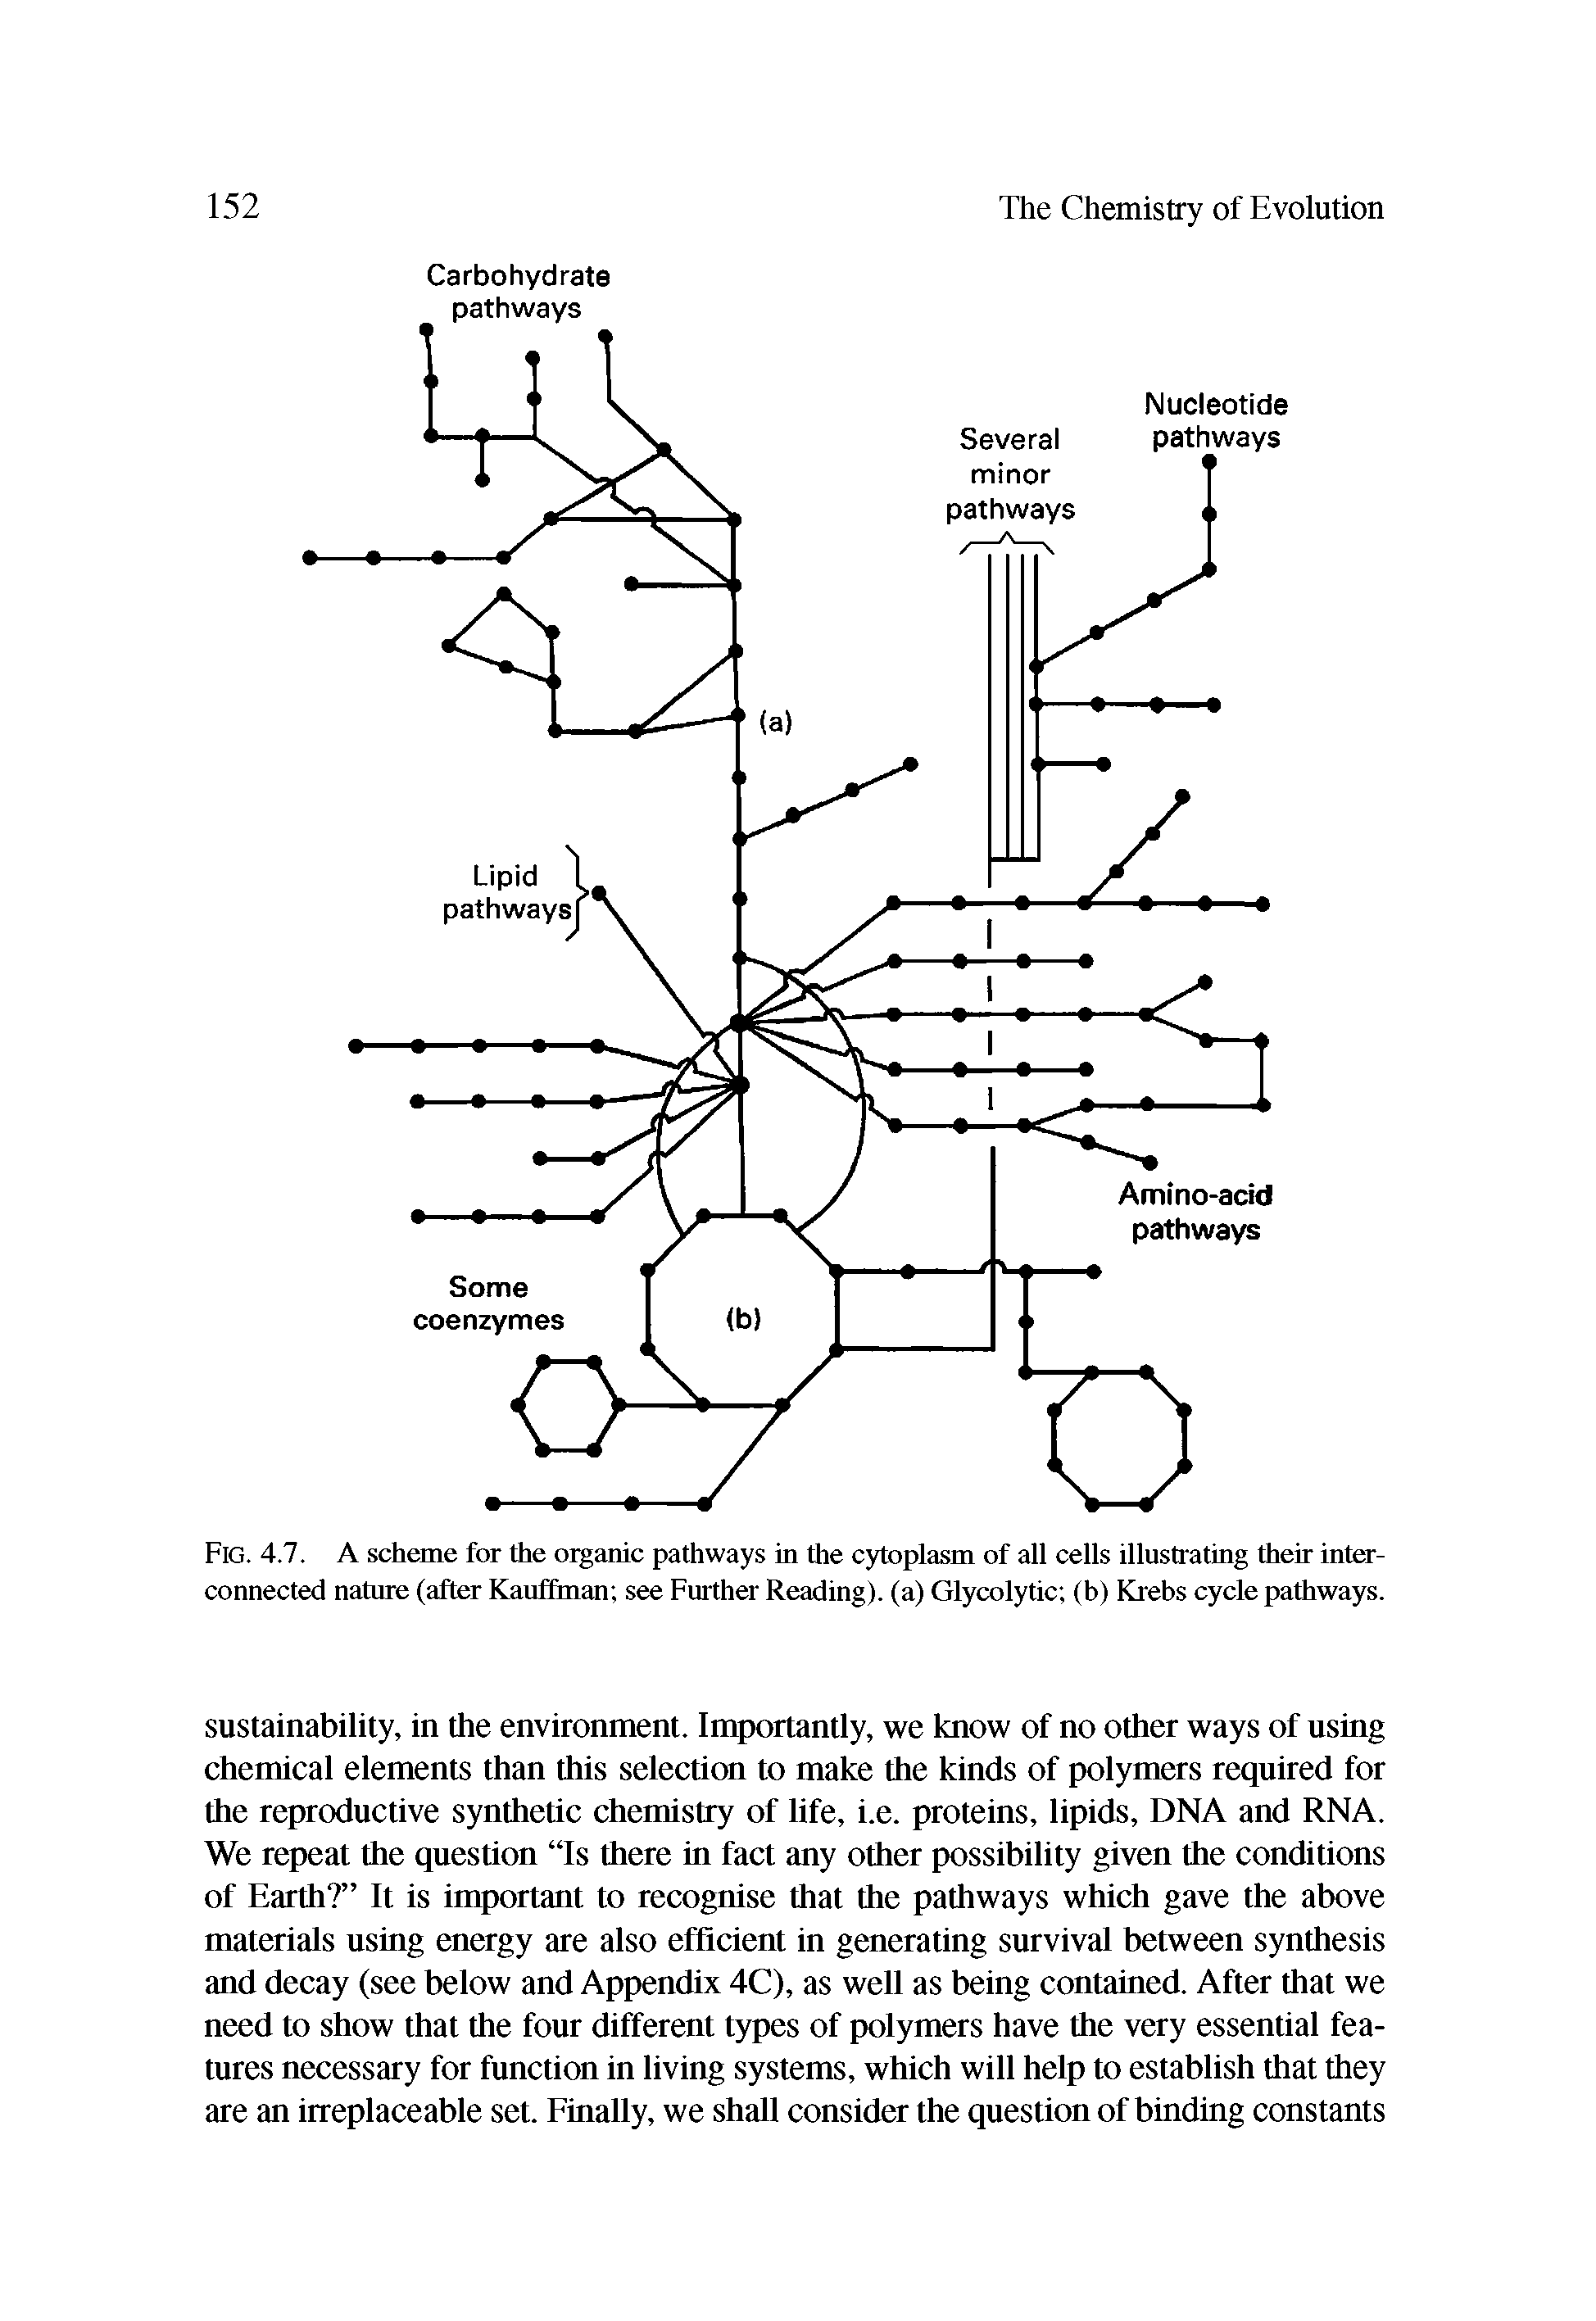 Fig. 4.7. A scheme for the organic pathways in the cytoplasm of all cells illustrating their interconnected nature (after Kauffman see Further Reading), (a) Glycolytic (b) Krebs cycle pathways.